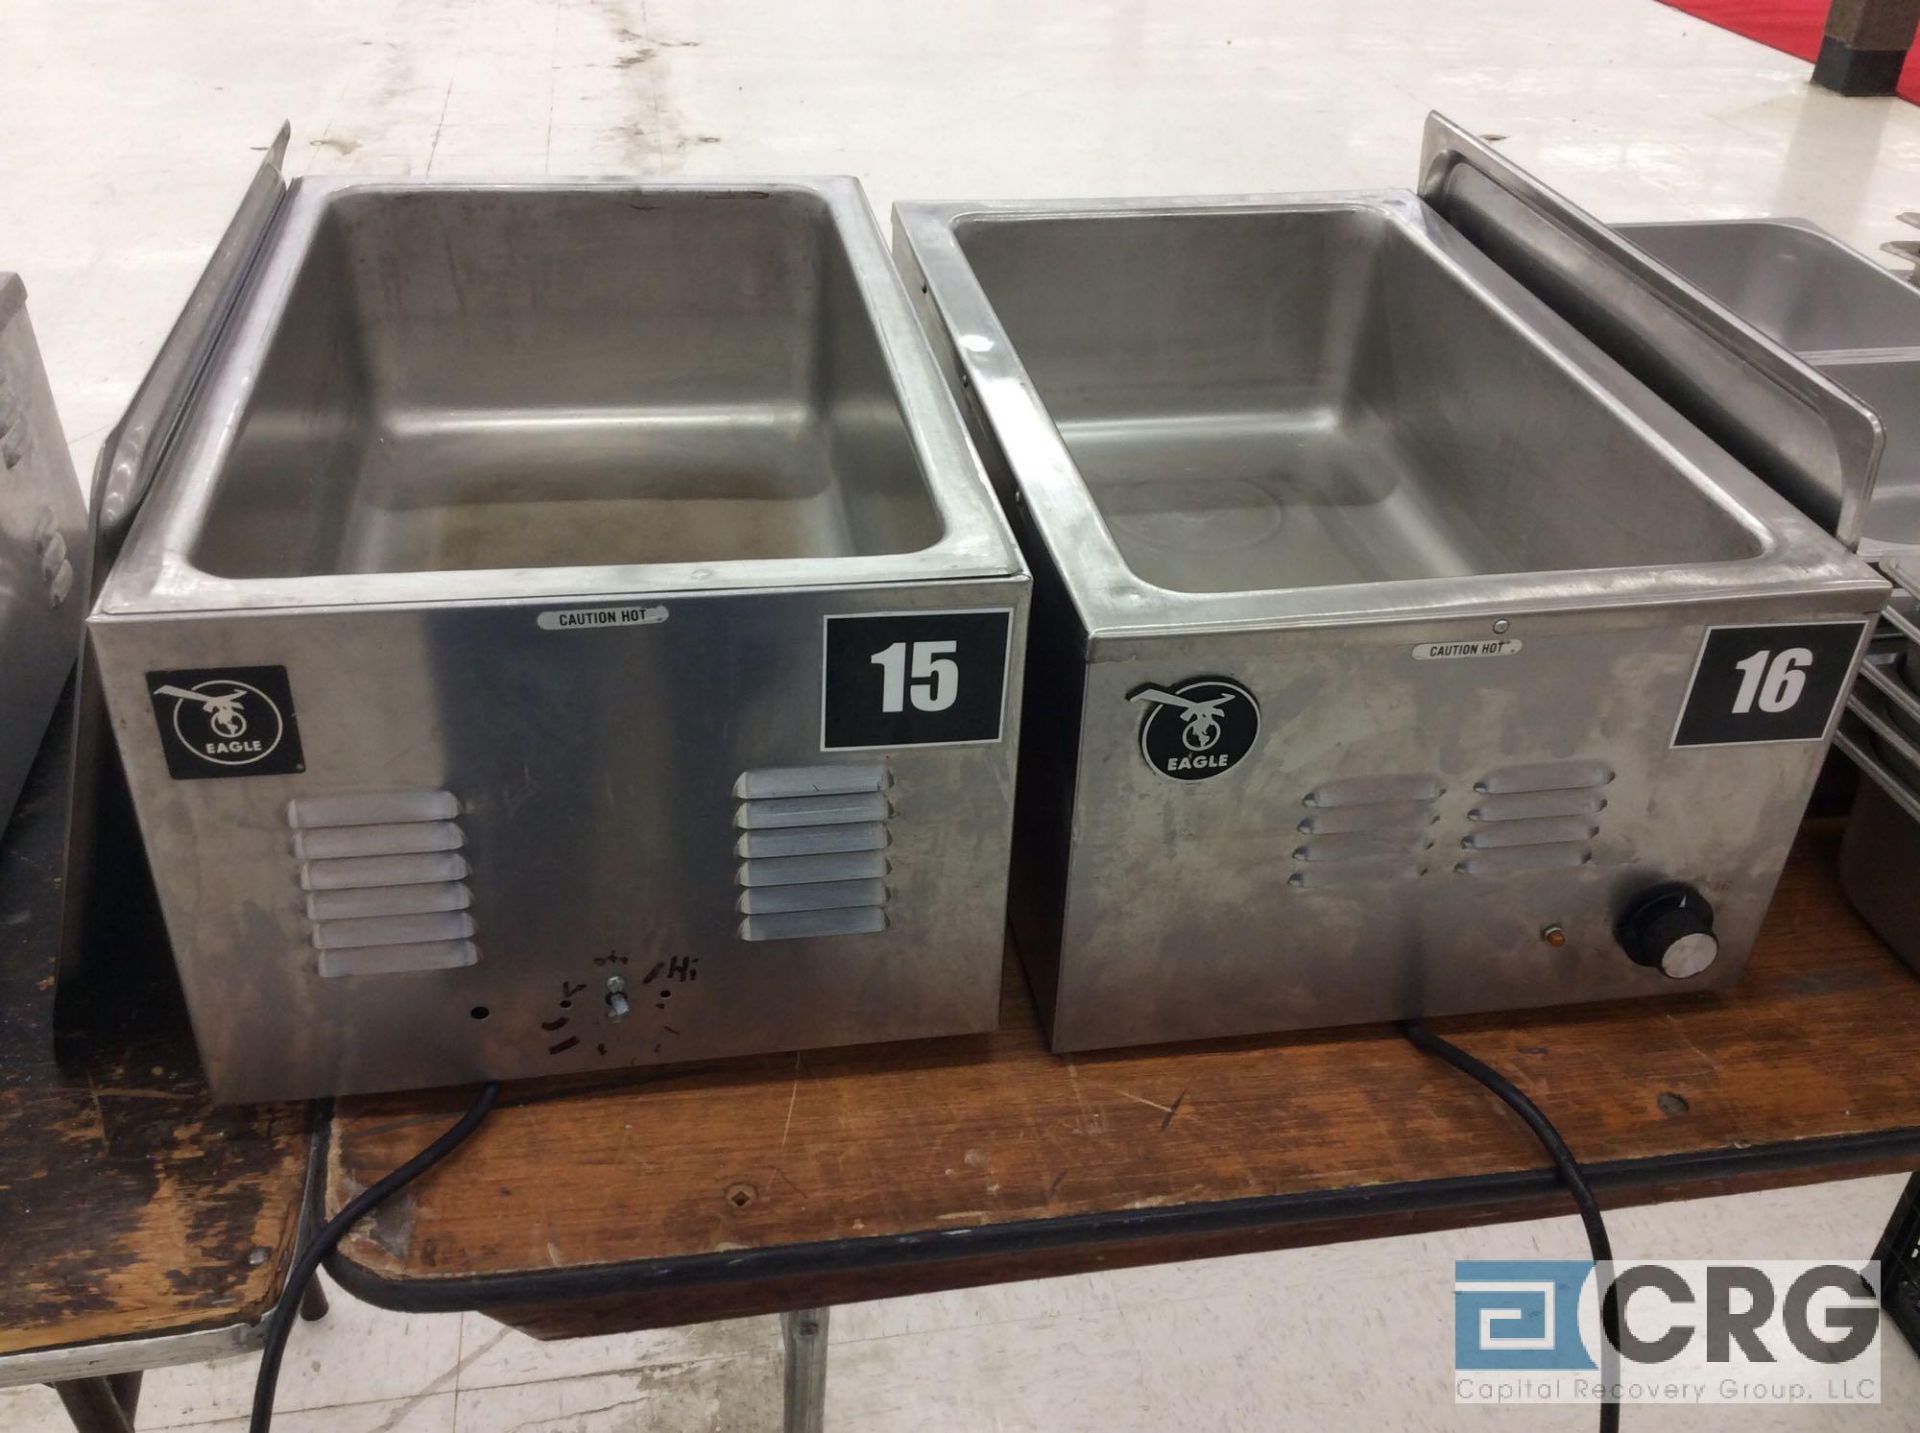 Lot of (2) Eagle SS electric food warmers, model 122OFW-120 and 1220 FWE. - Image 2 of 4